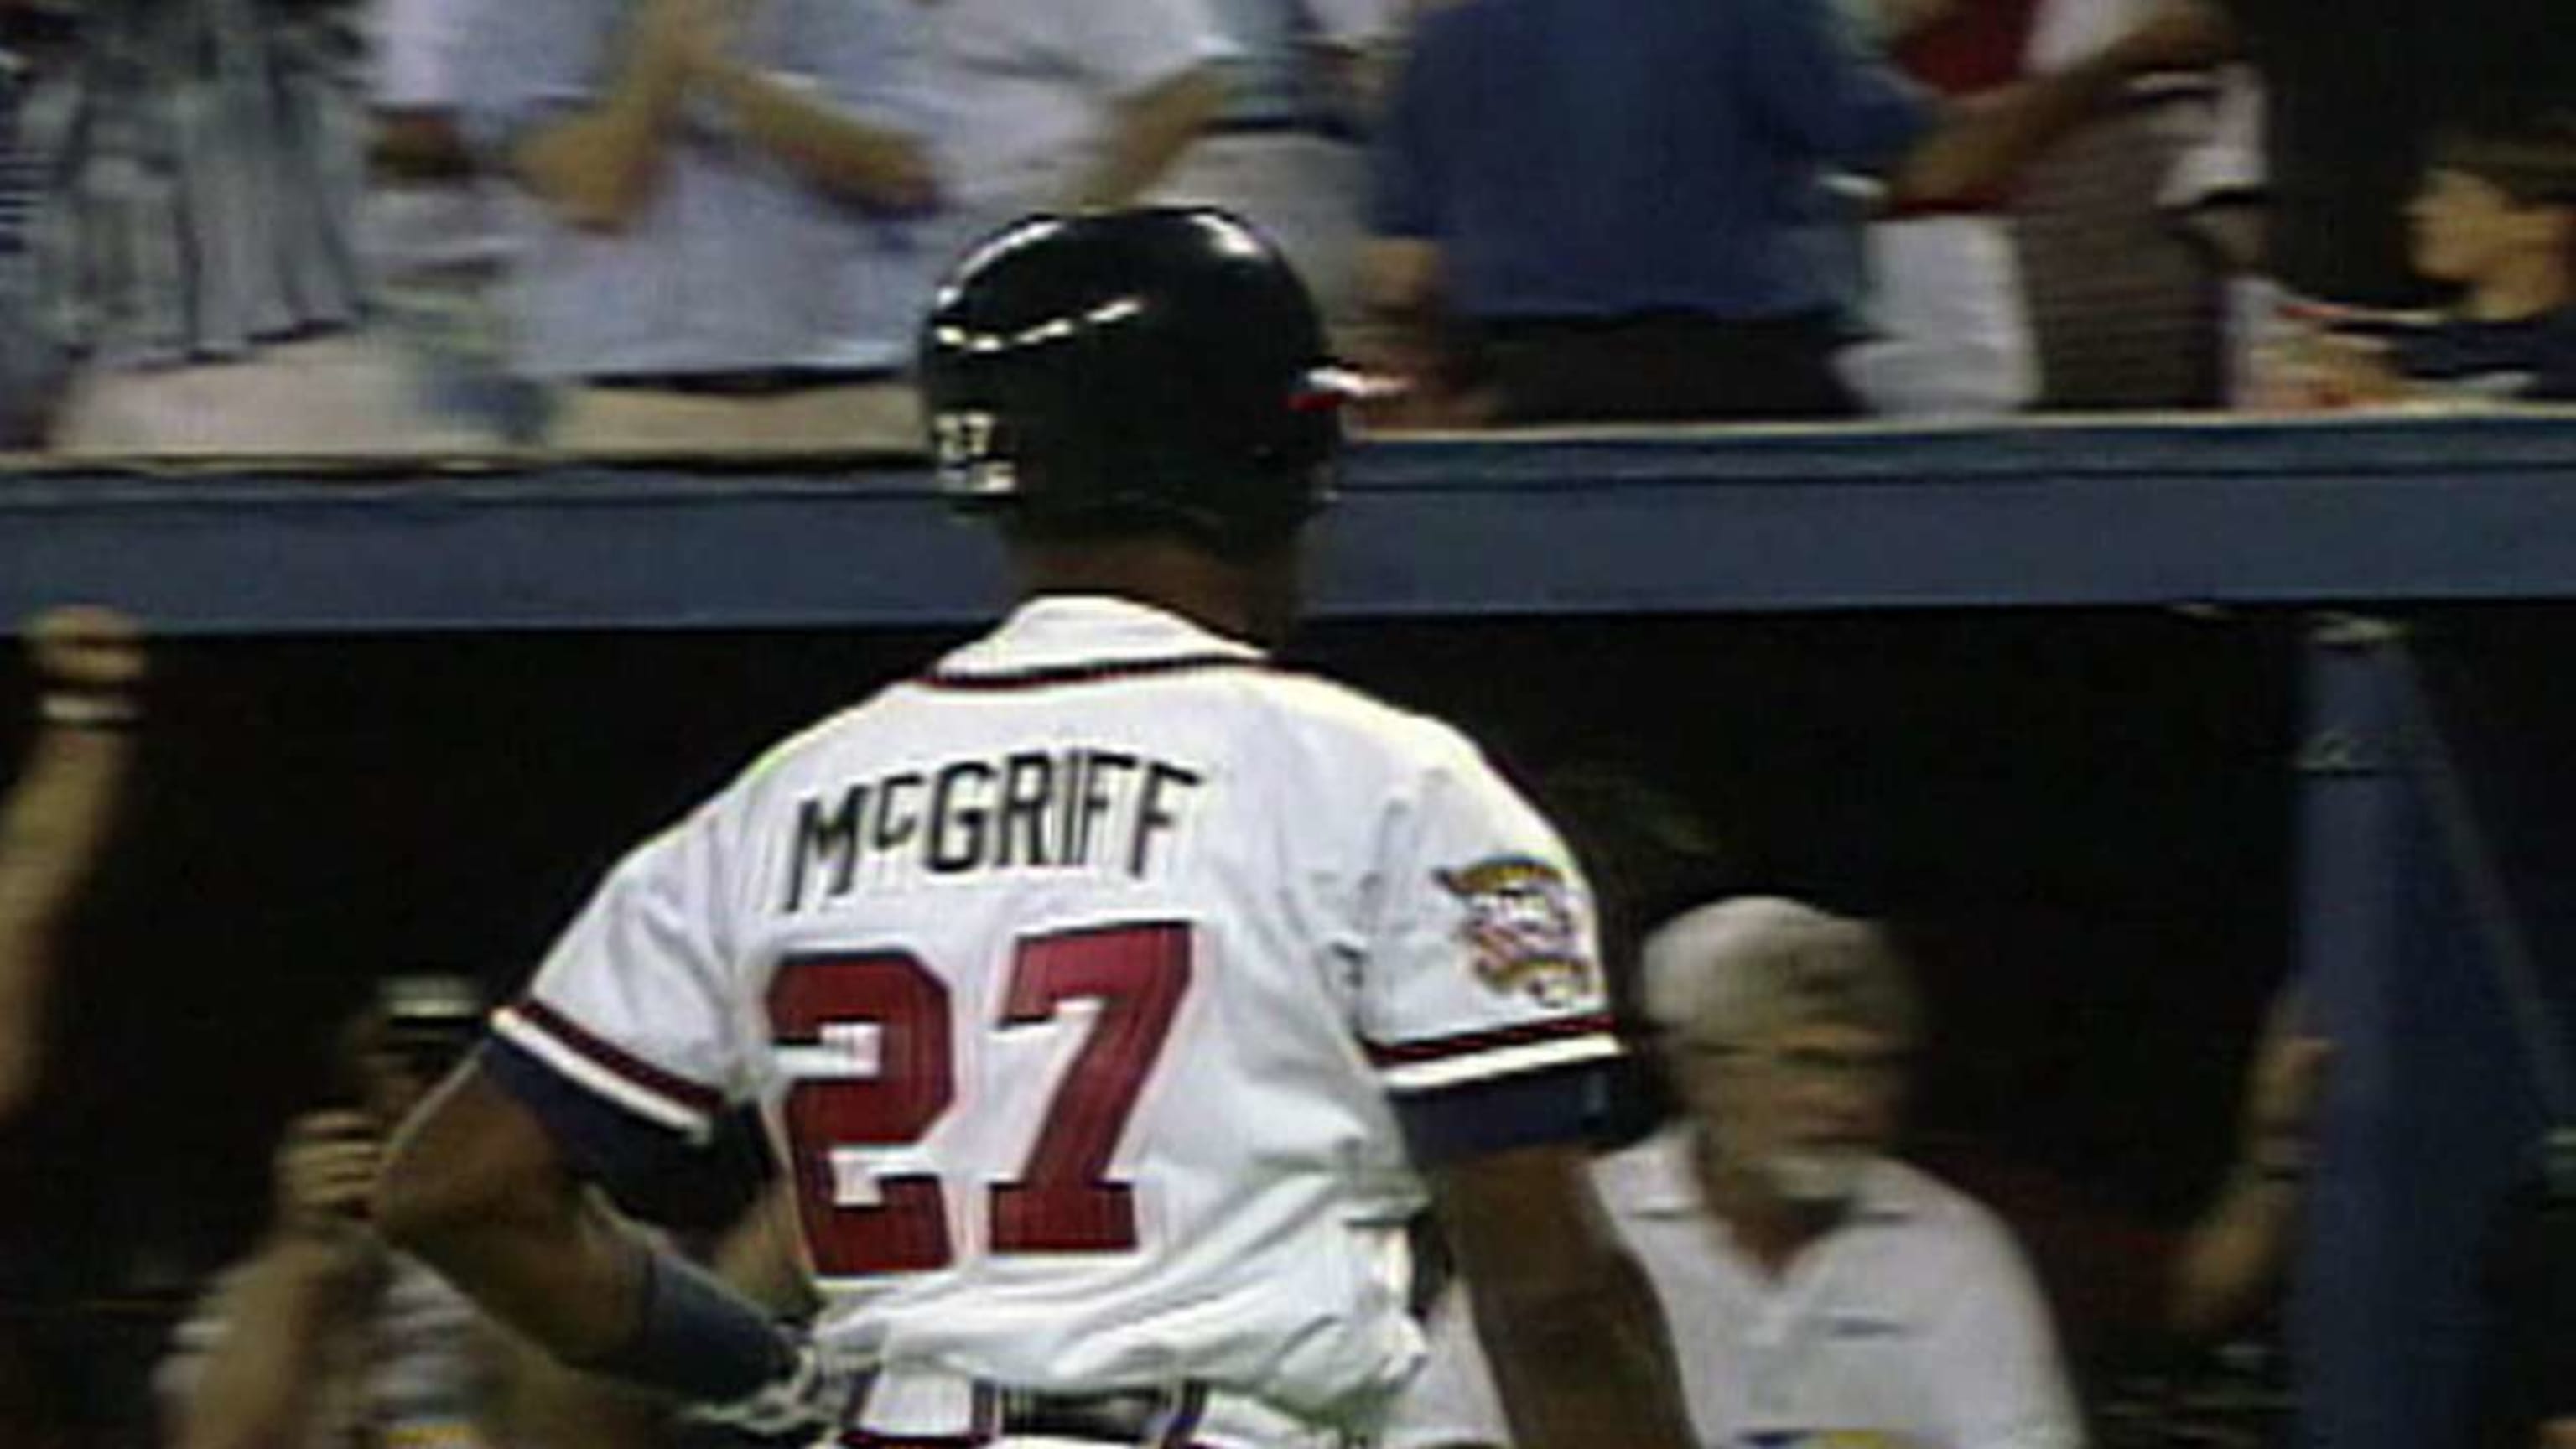 fred mcgriff 27